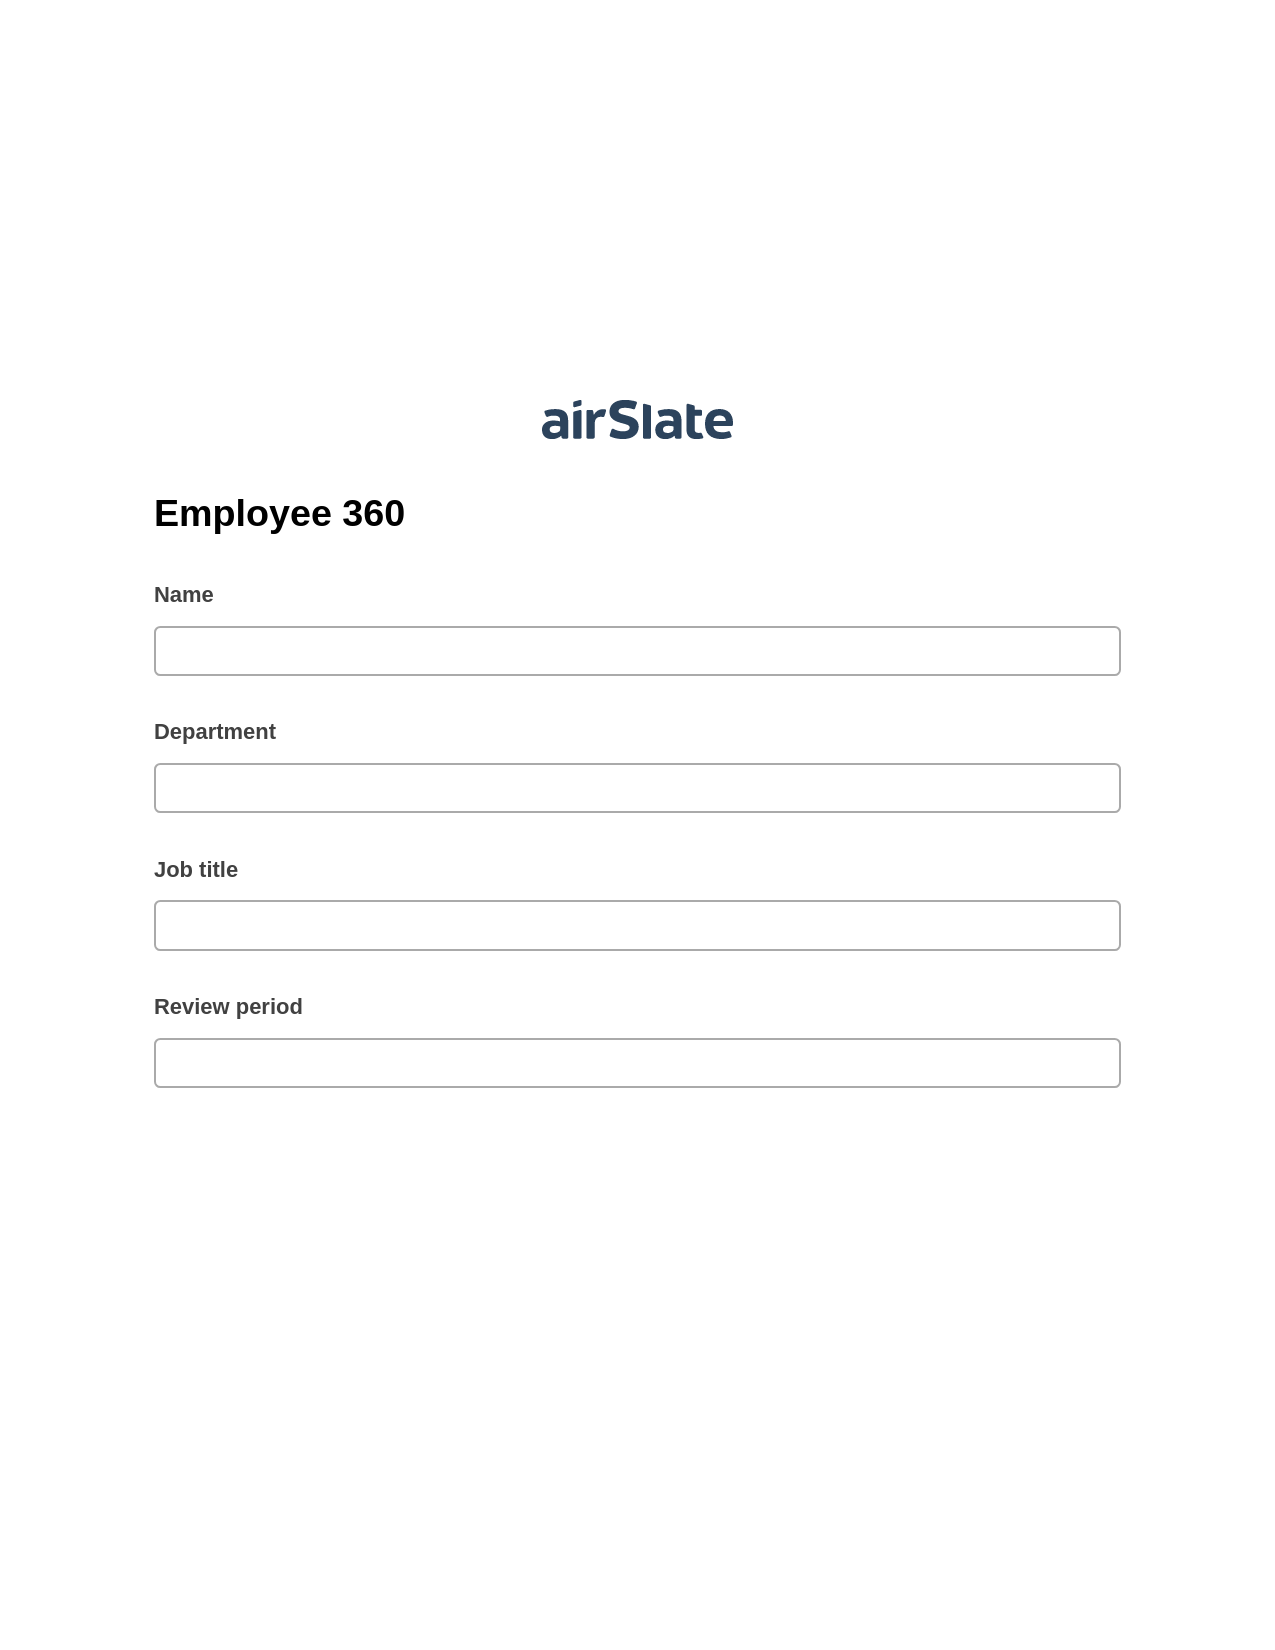 Employee 360 Pre-fill Dropdowns from Smartsheet Bot, Update MS Dynamics 365 Record Bot, Archive to Dropbox Bot